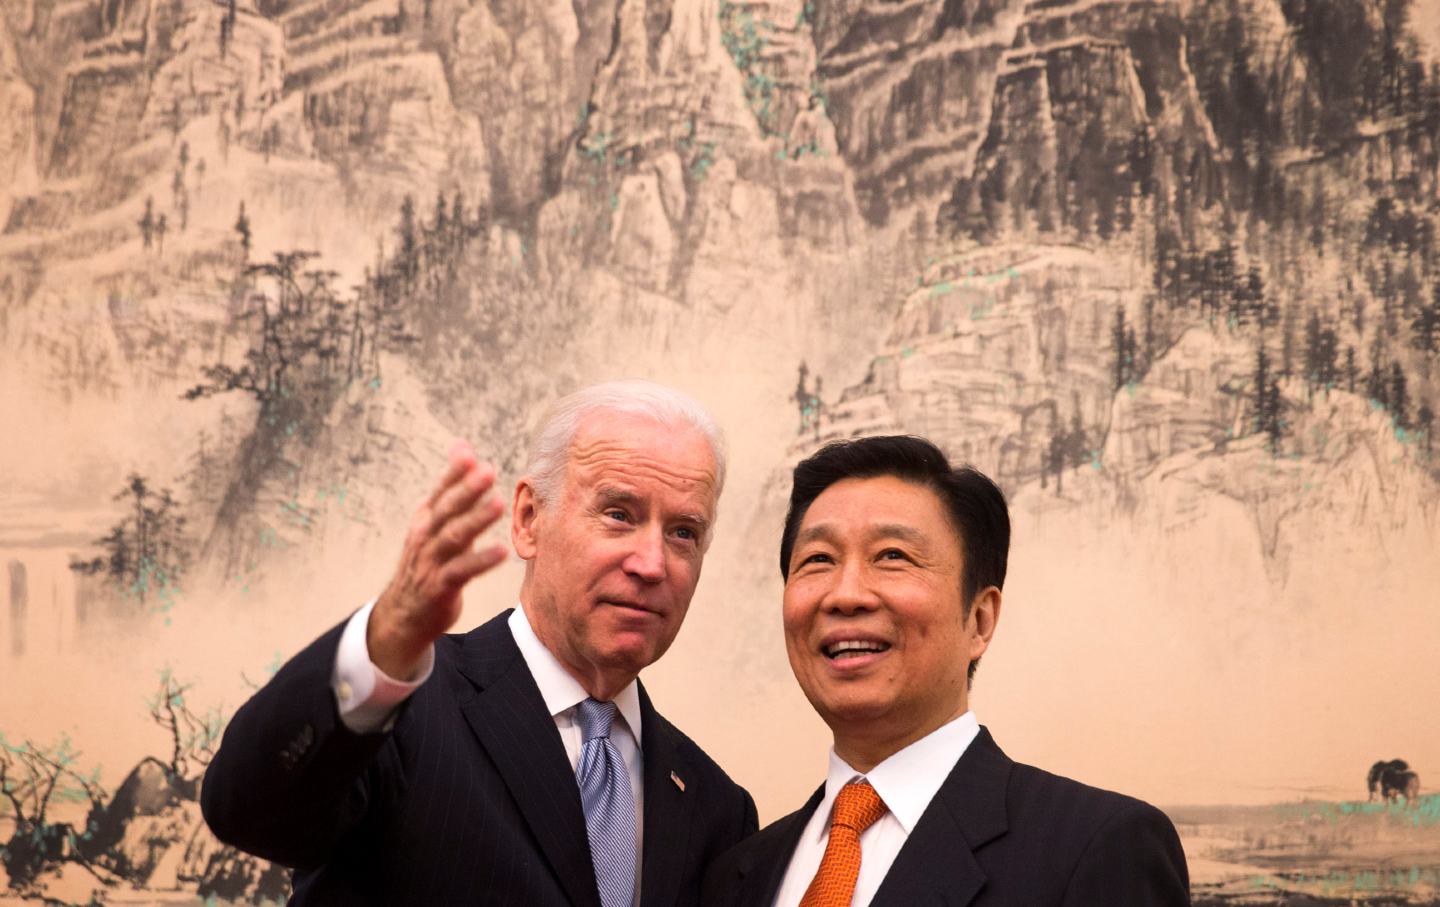 Joe Biden gestures while speaking with a smiling Li Yuanchao